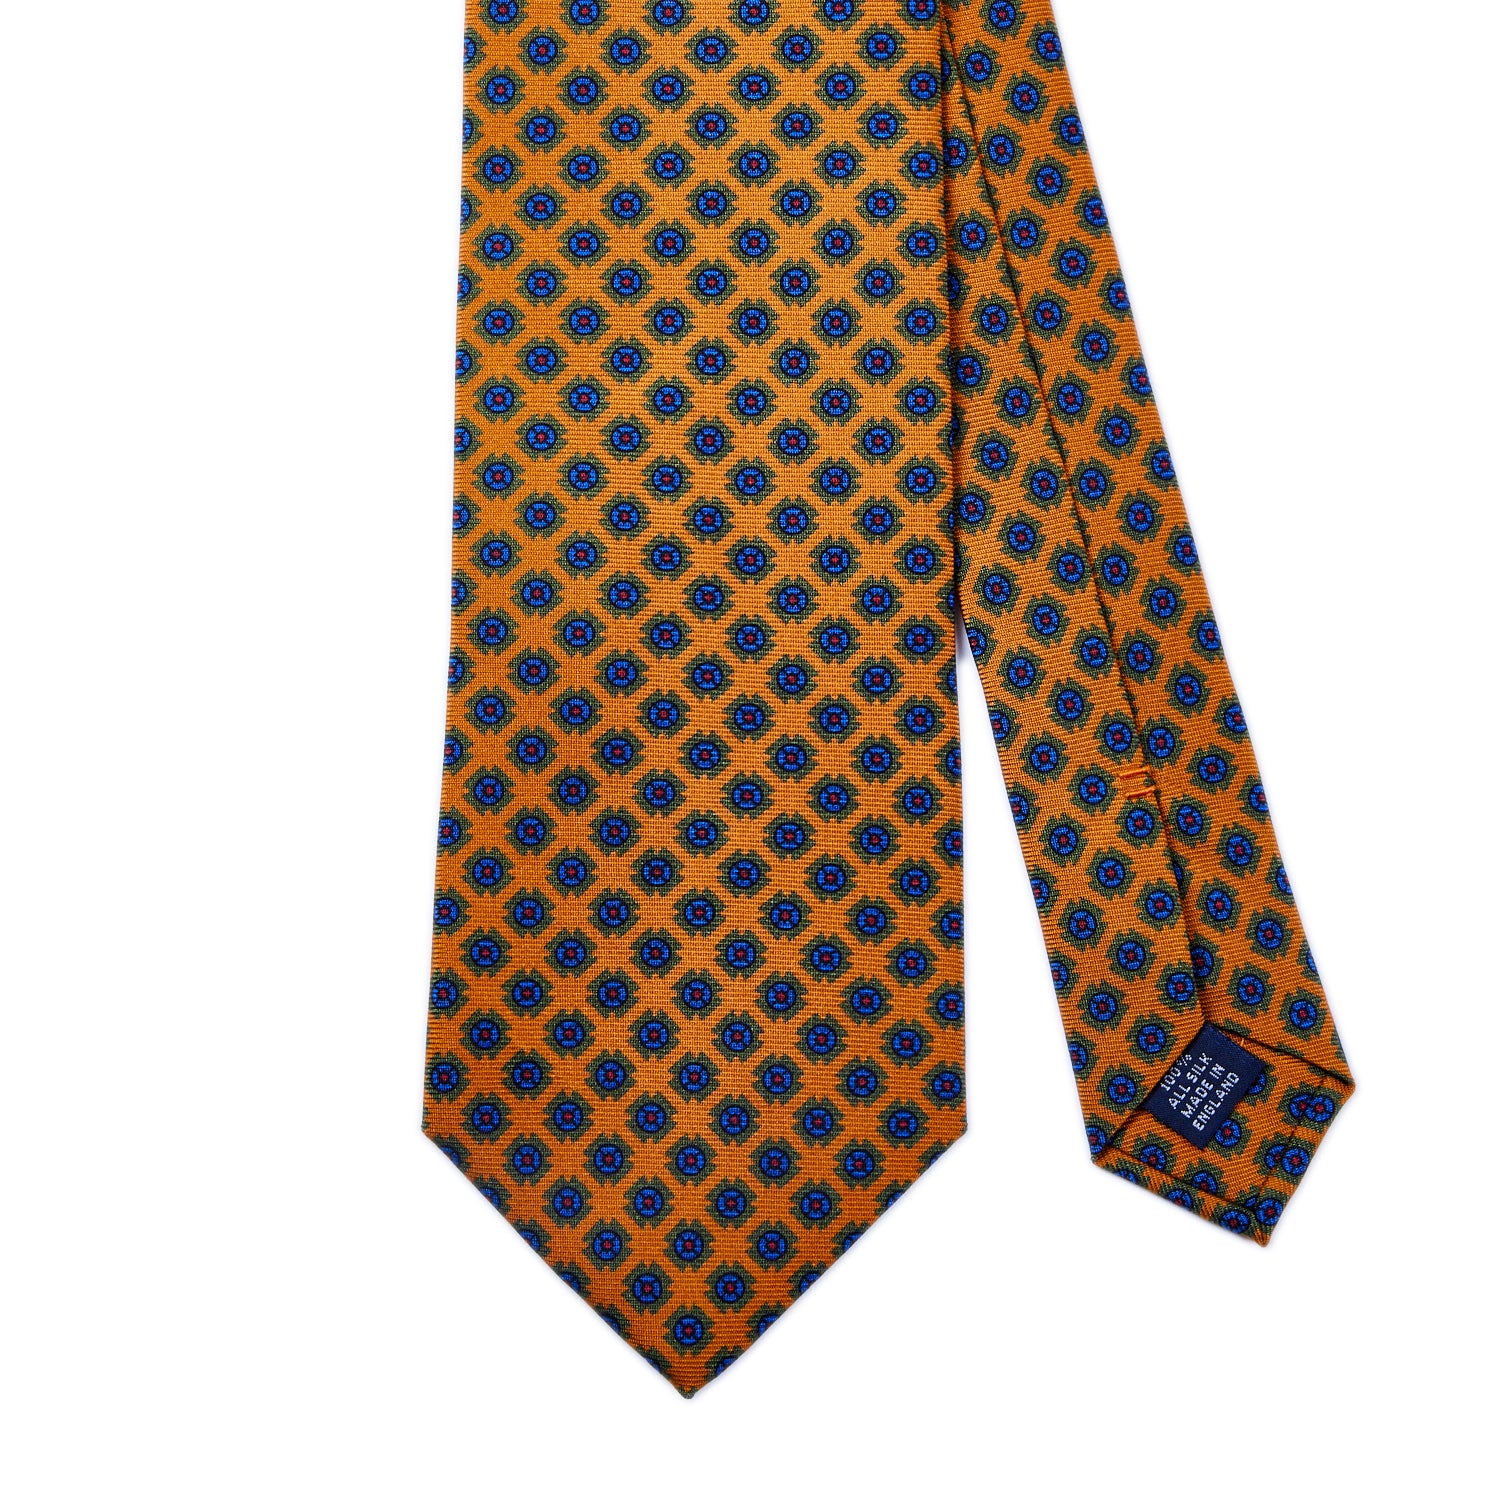 A Sovereign Grade Amber Deco Square Printed Silk Tie by KirbyAllison.com with orange and blue polka dots on a white background.